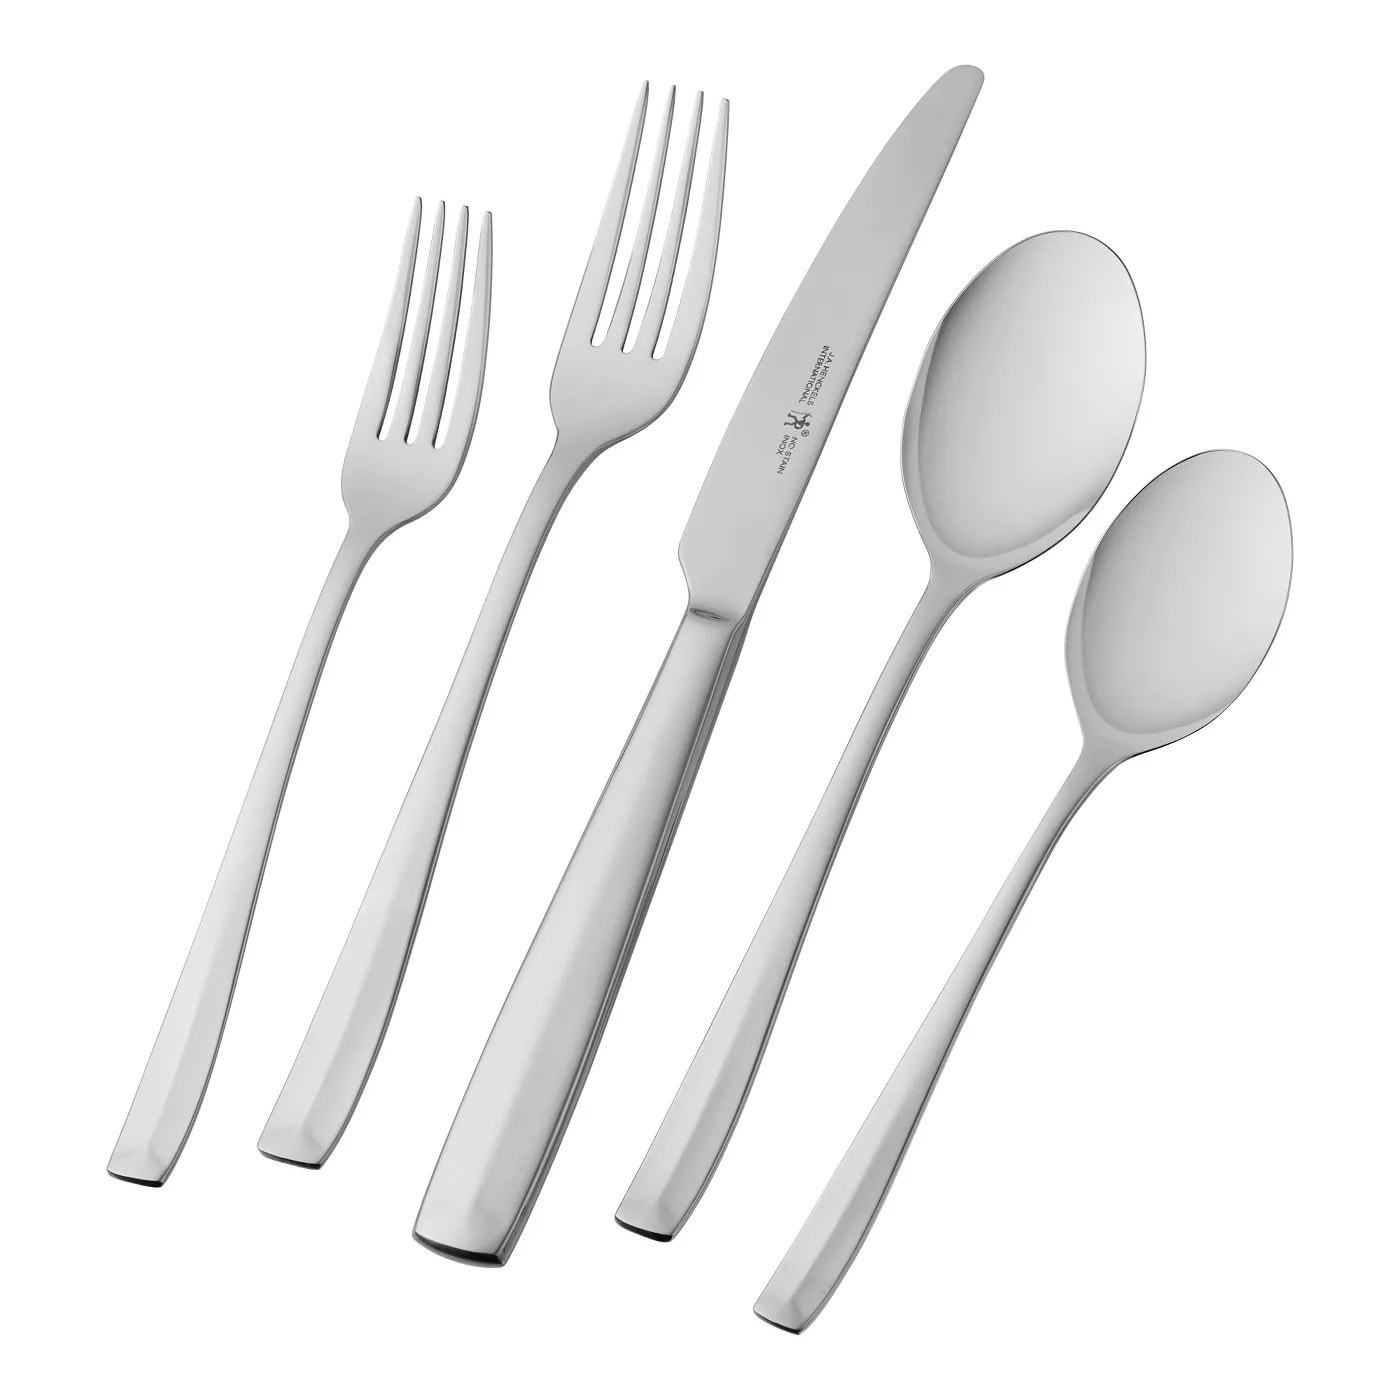 The stainless steel flatware